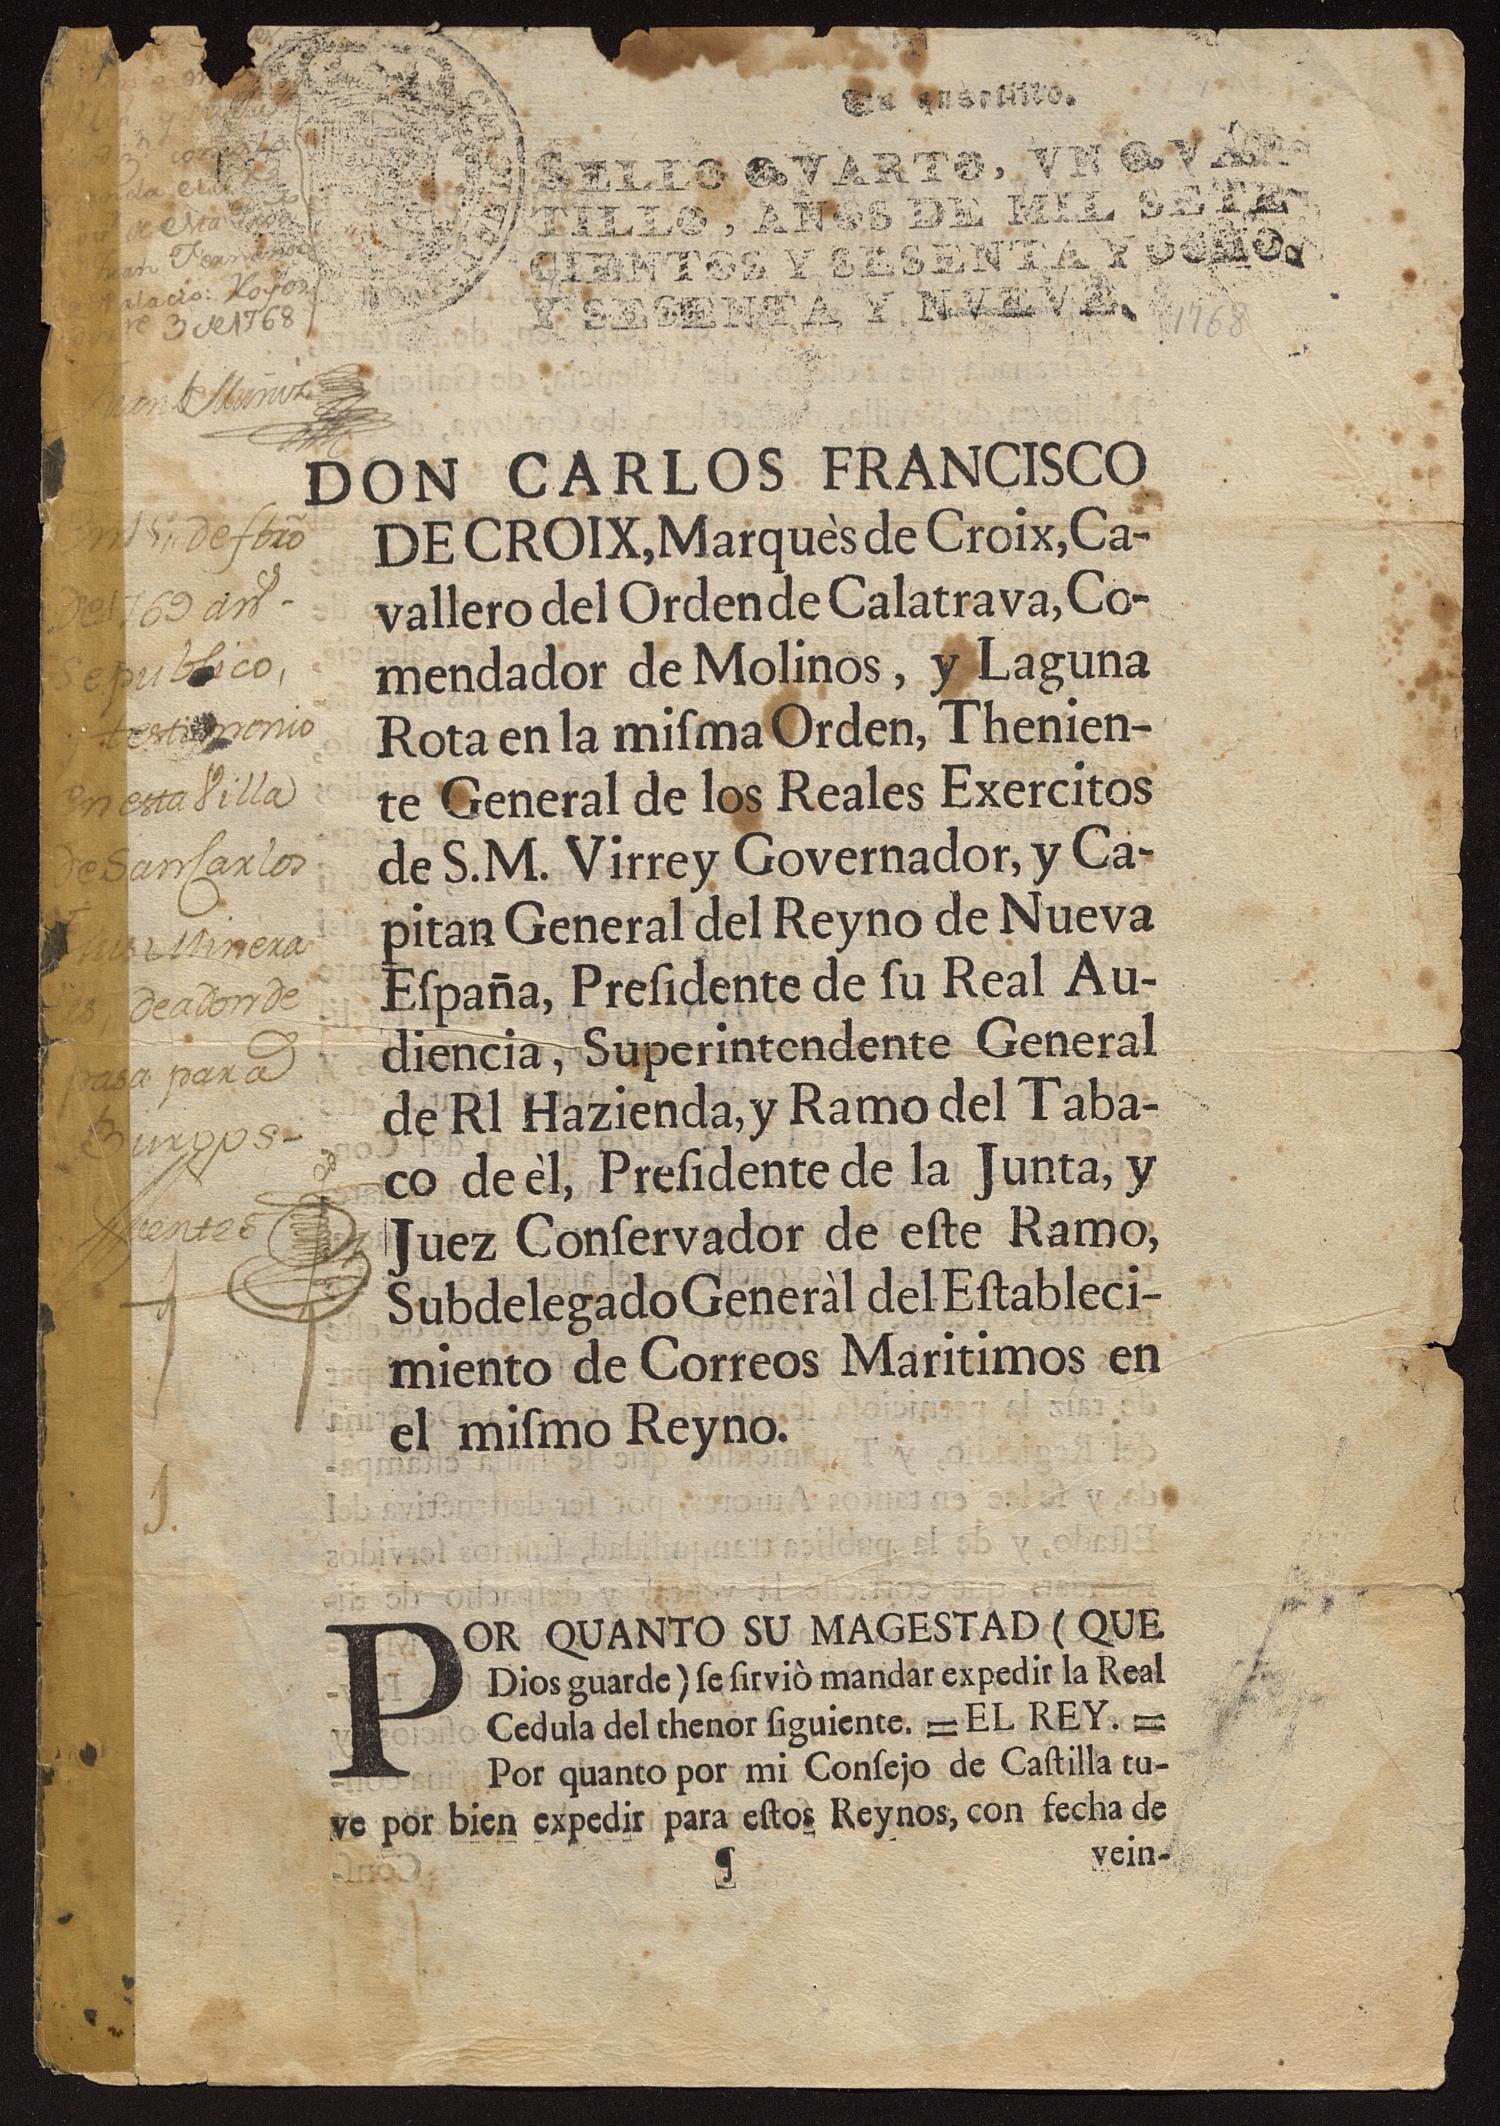 [Royal Decree from King Carlos III to the Marques de Croix] - The